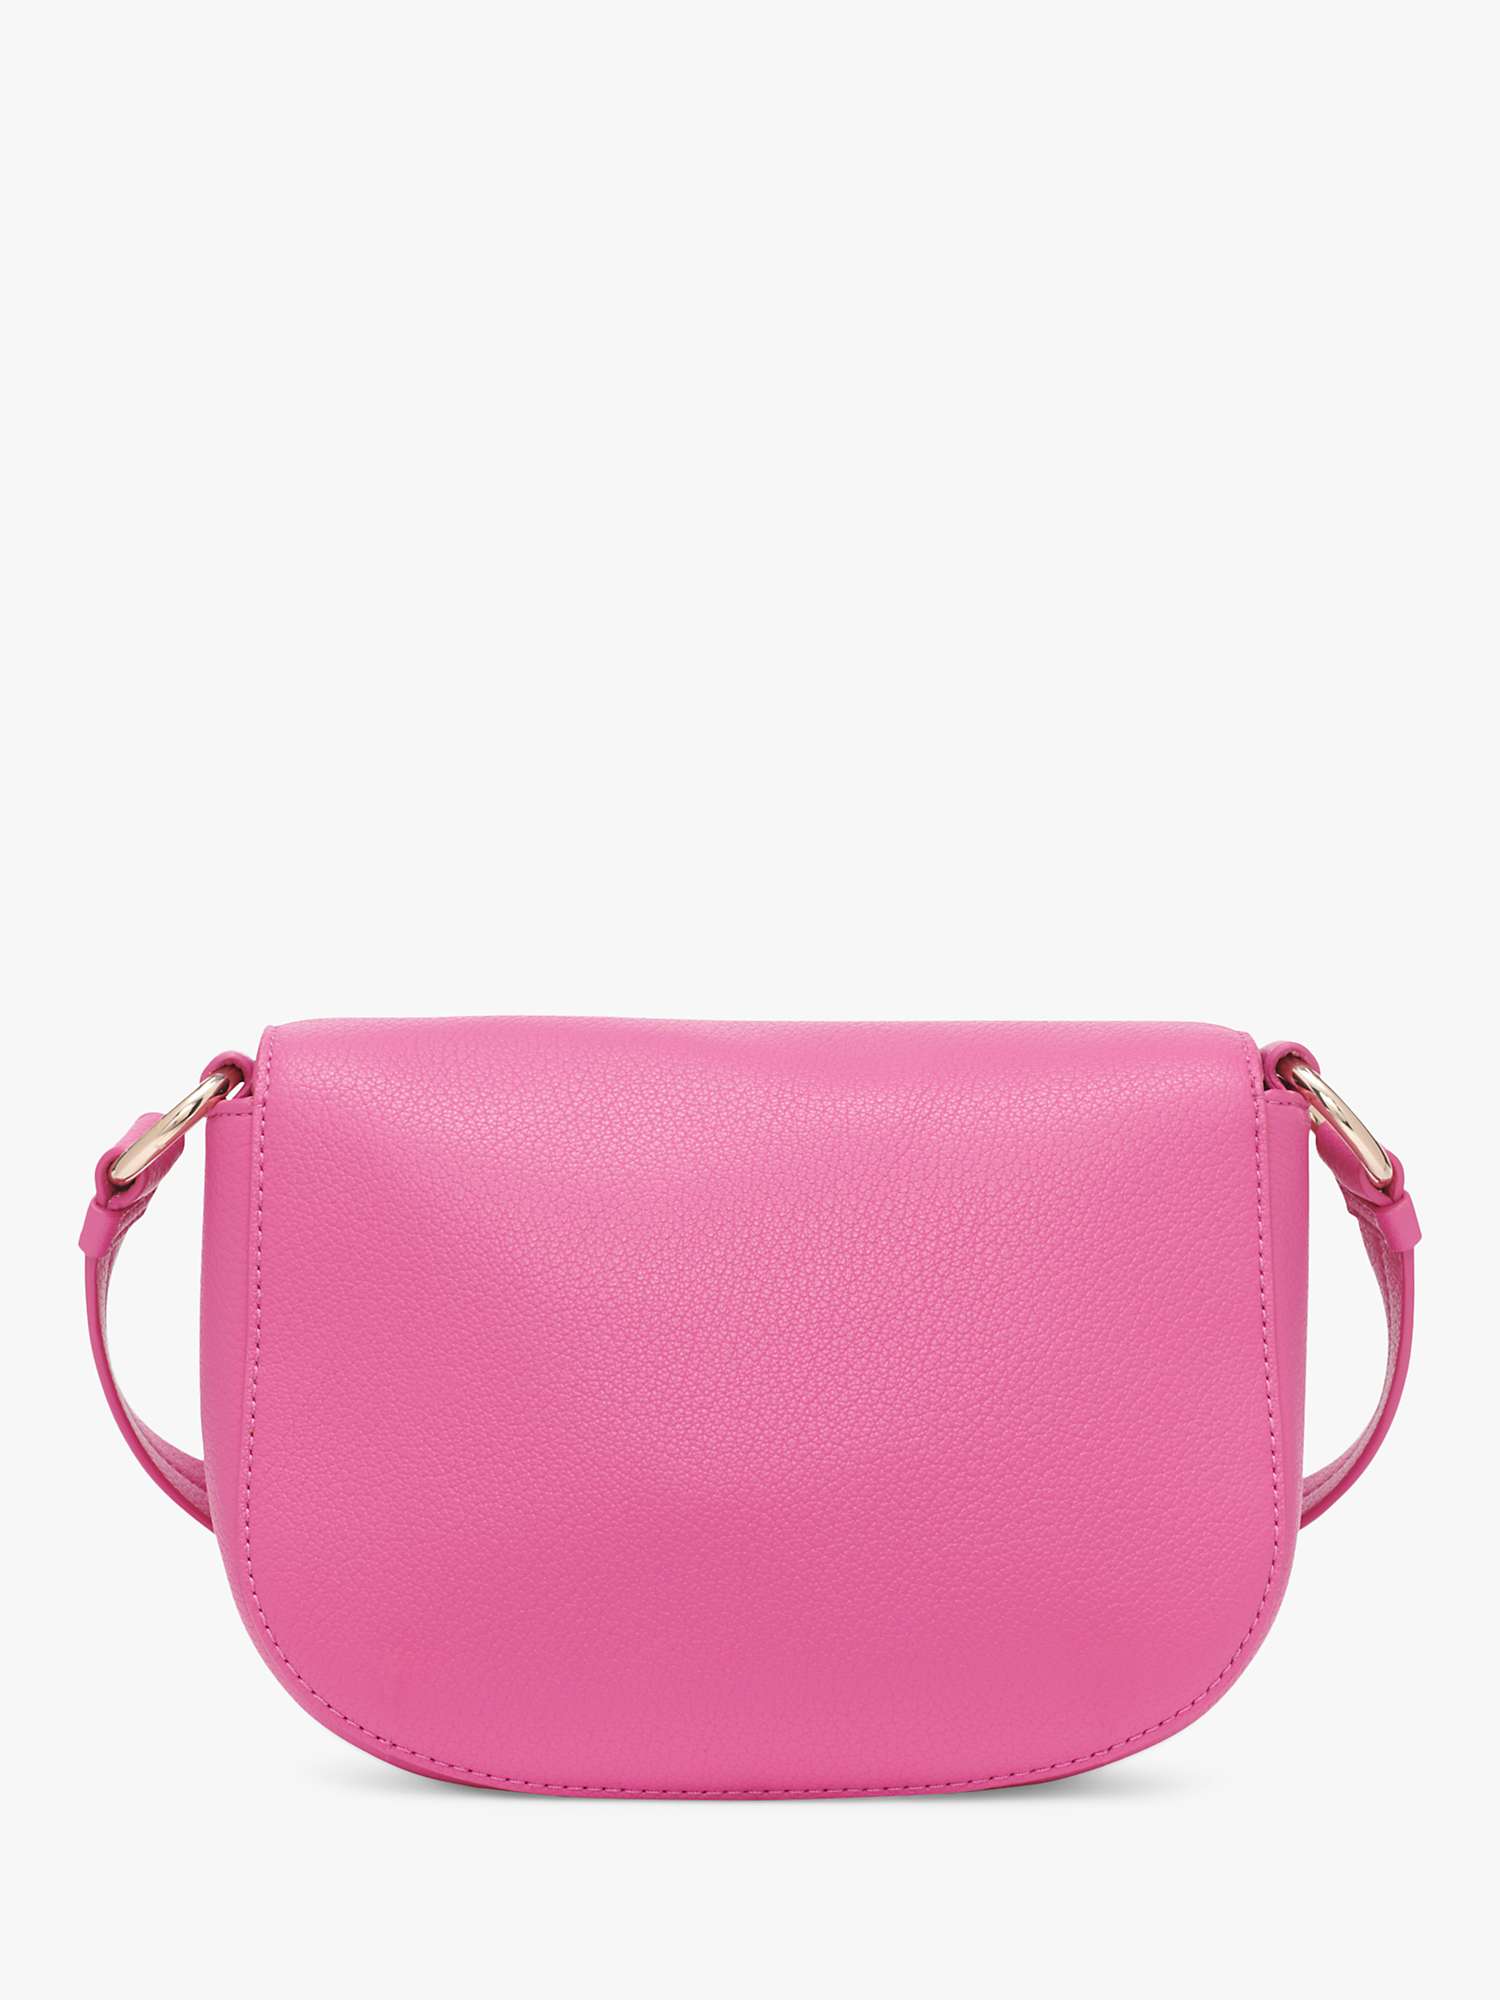 Buy DKNY 7th Avenue Leather Cross Body Bag, Wisteria Online at johnlewis.com